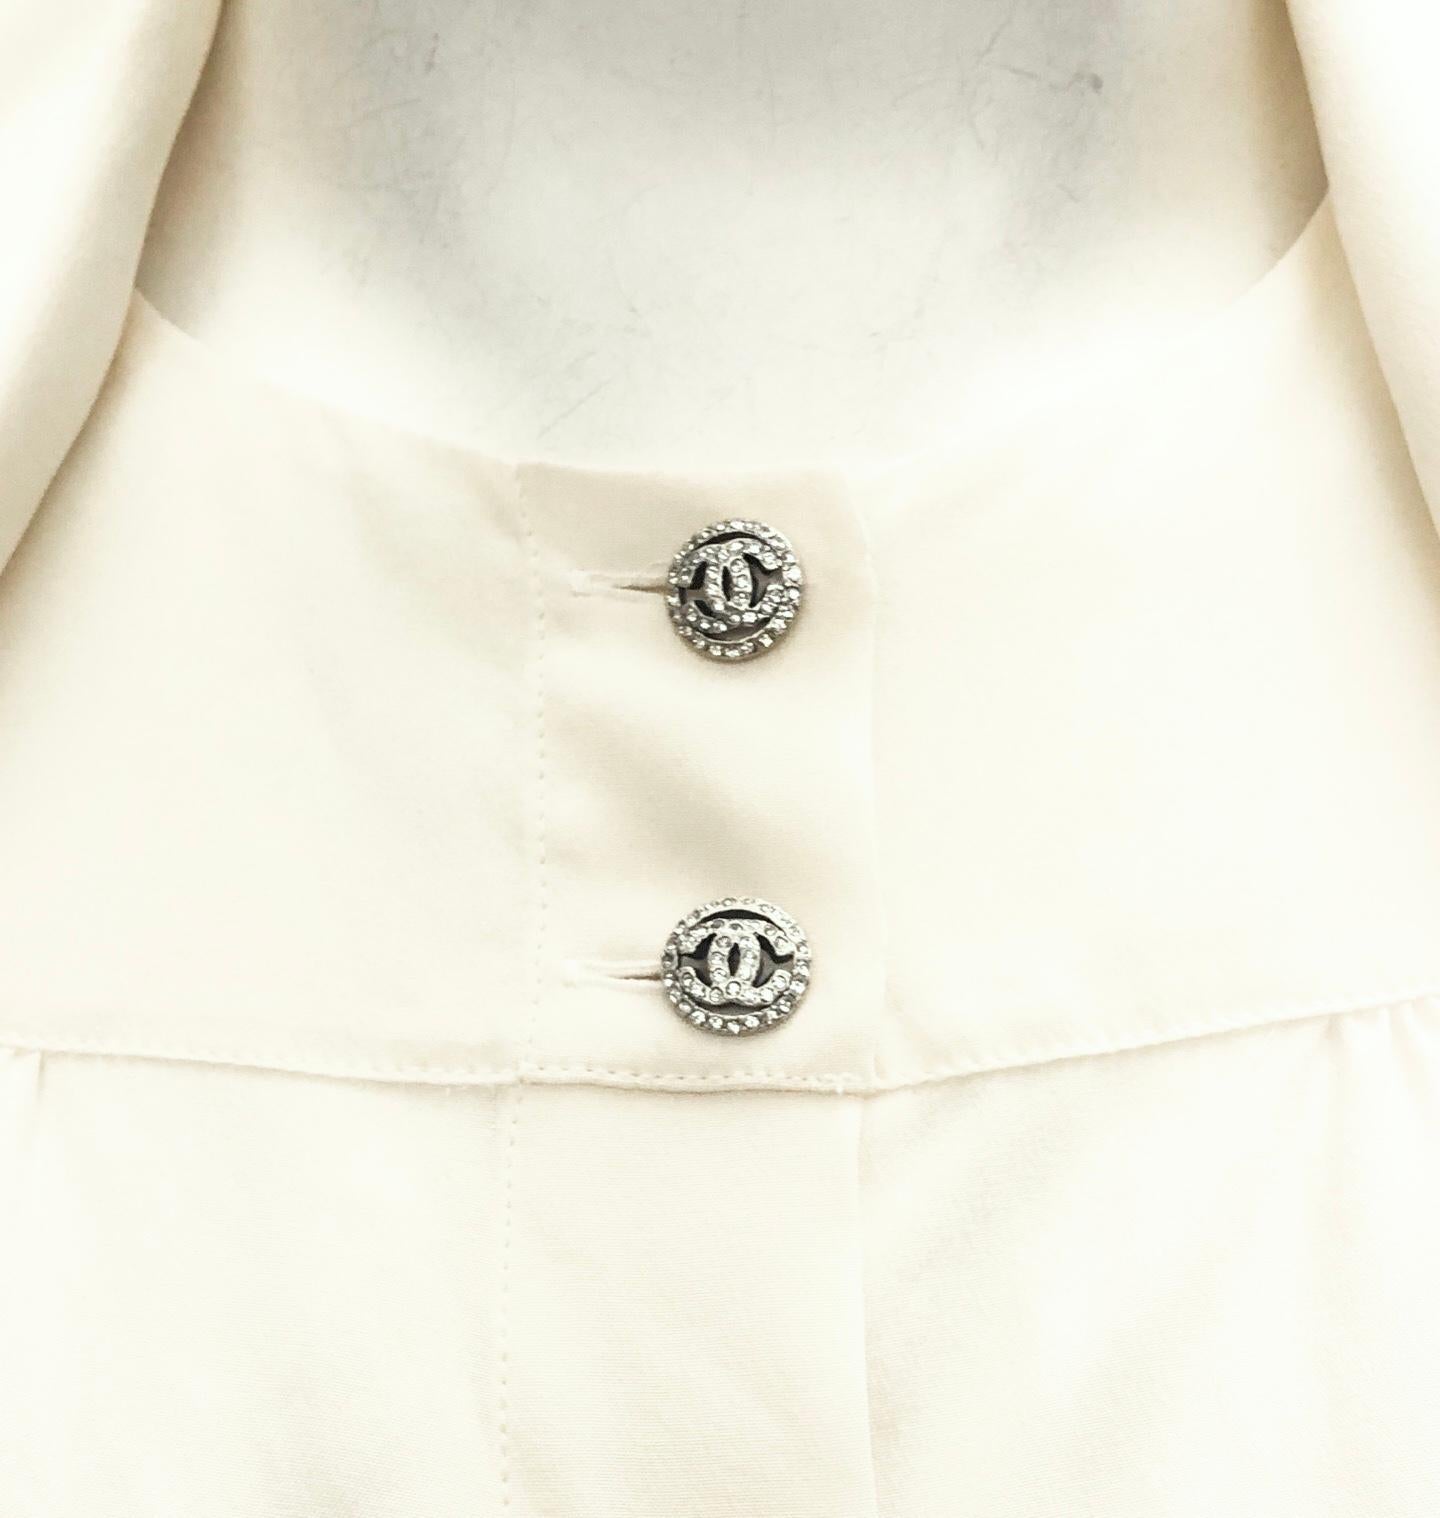 - Chanel cream silk cut out sleeve blouse from Fall year 2007 collection. 

- Gathered seams at shoulders, back and front. 

- Cut outs at sleeves creating a draped effect. 

-  Two silver tone crystal embellished CC buttons at collar and tonal tie